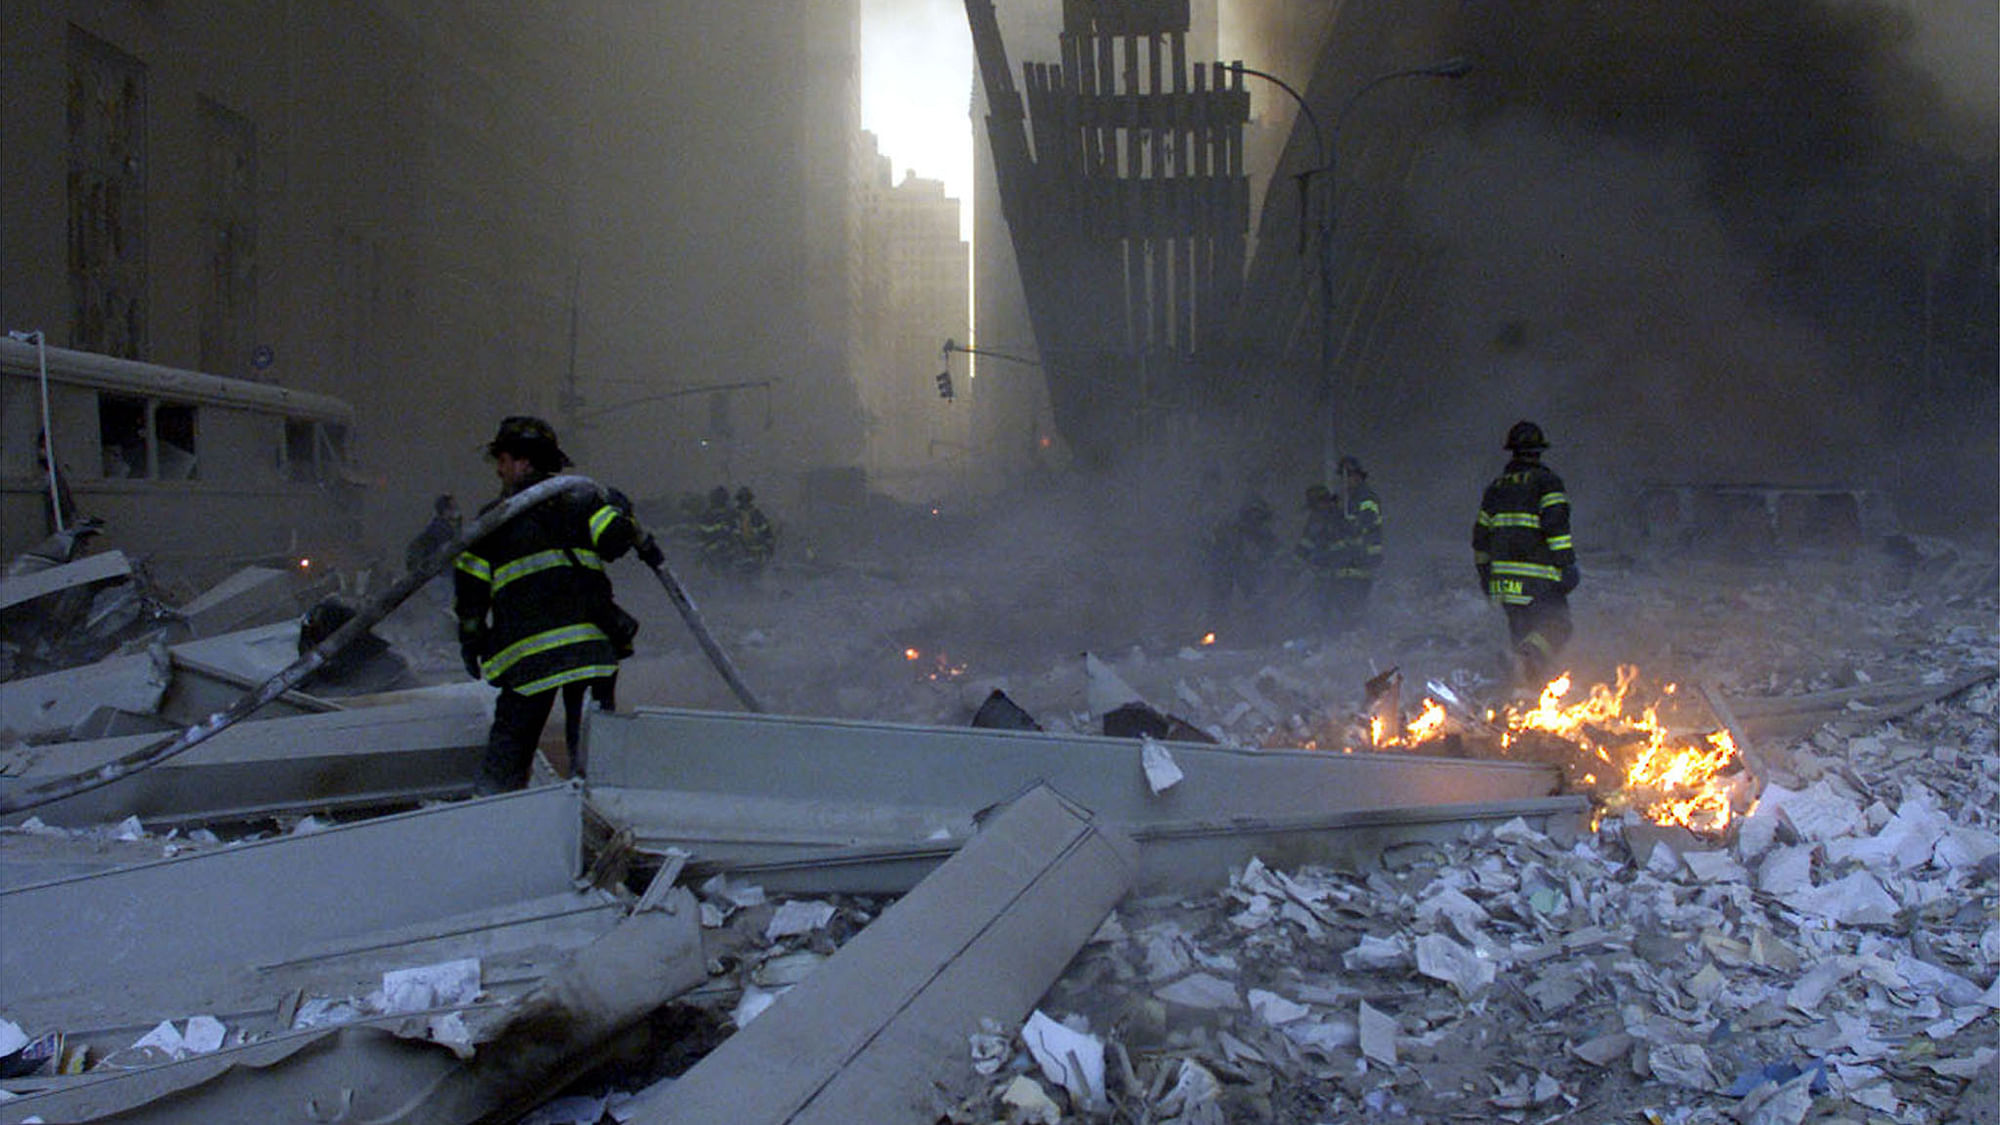 The WTC attacks were unprecedented in the history of civil
aviation, security experts said. (Photo: Reuters) &nbsp; &nbsp;  &nbsp;